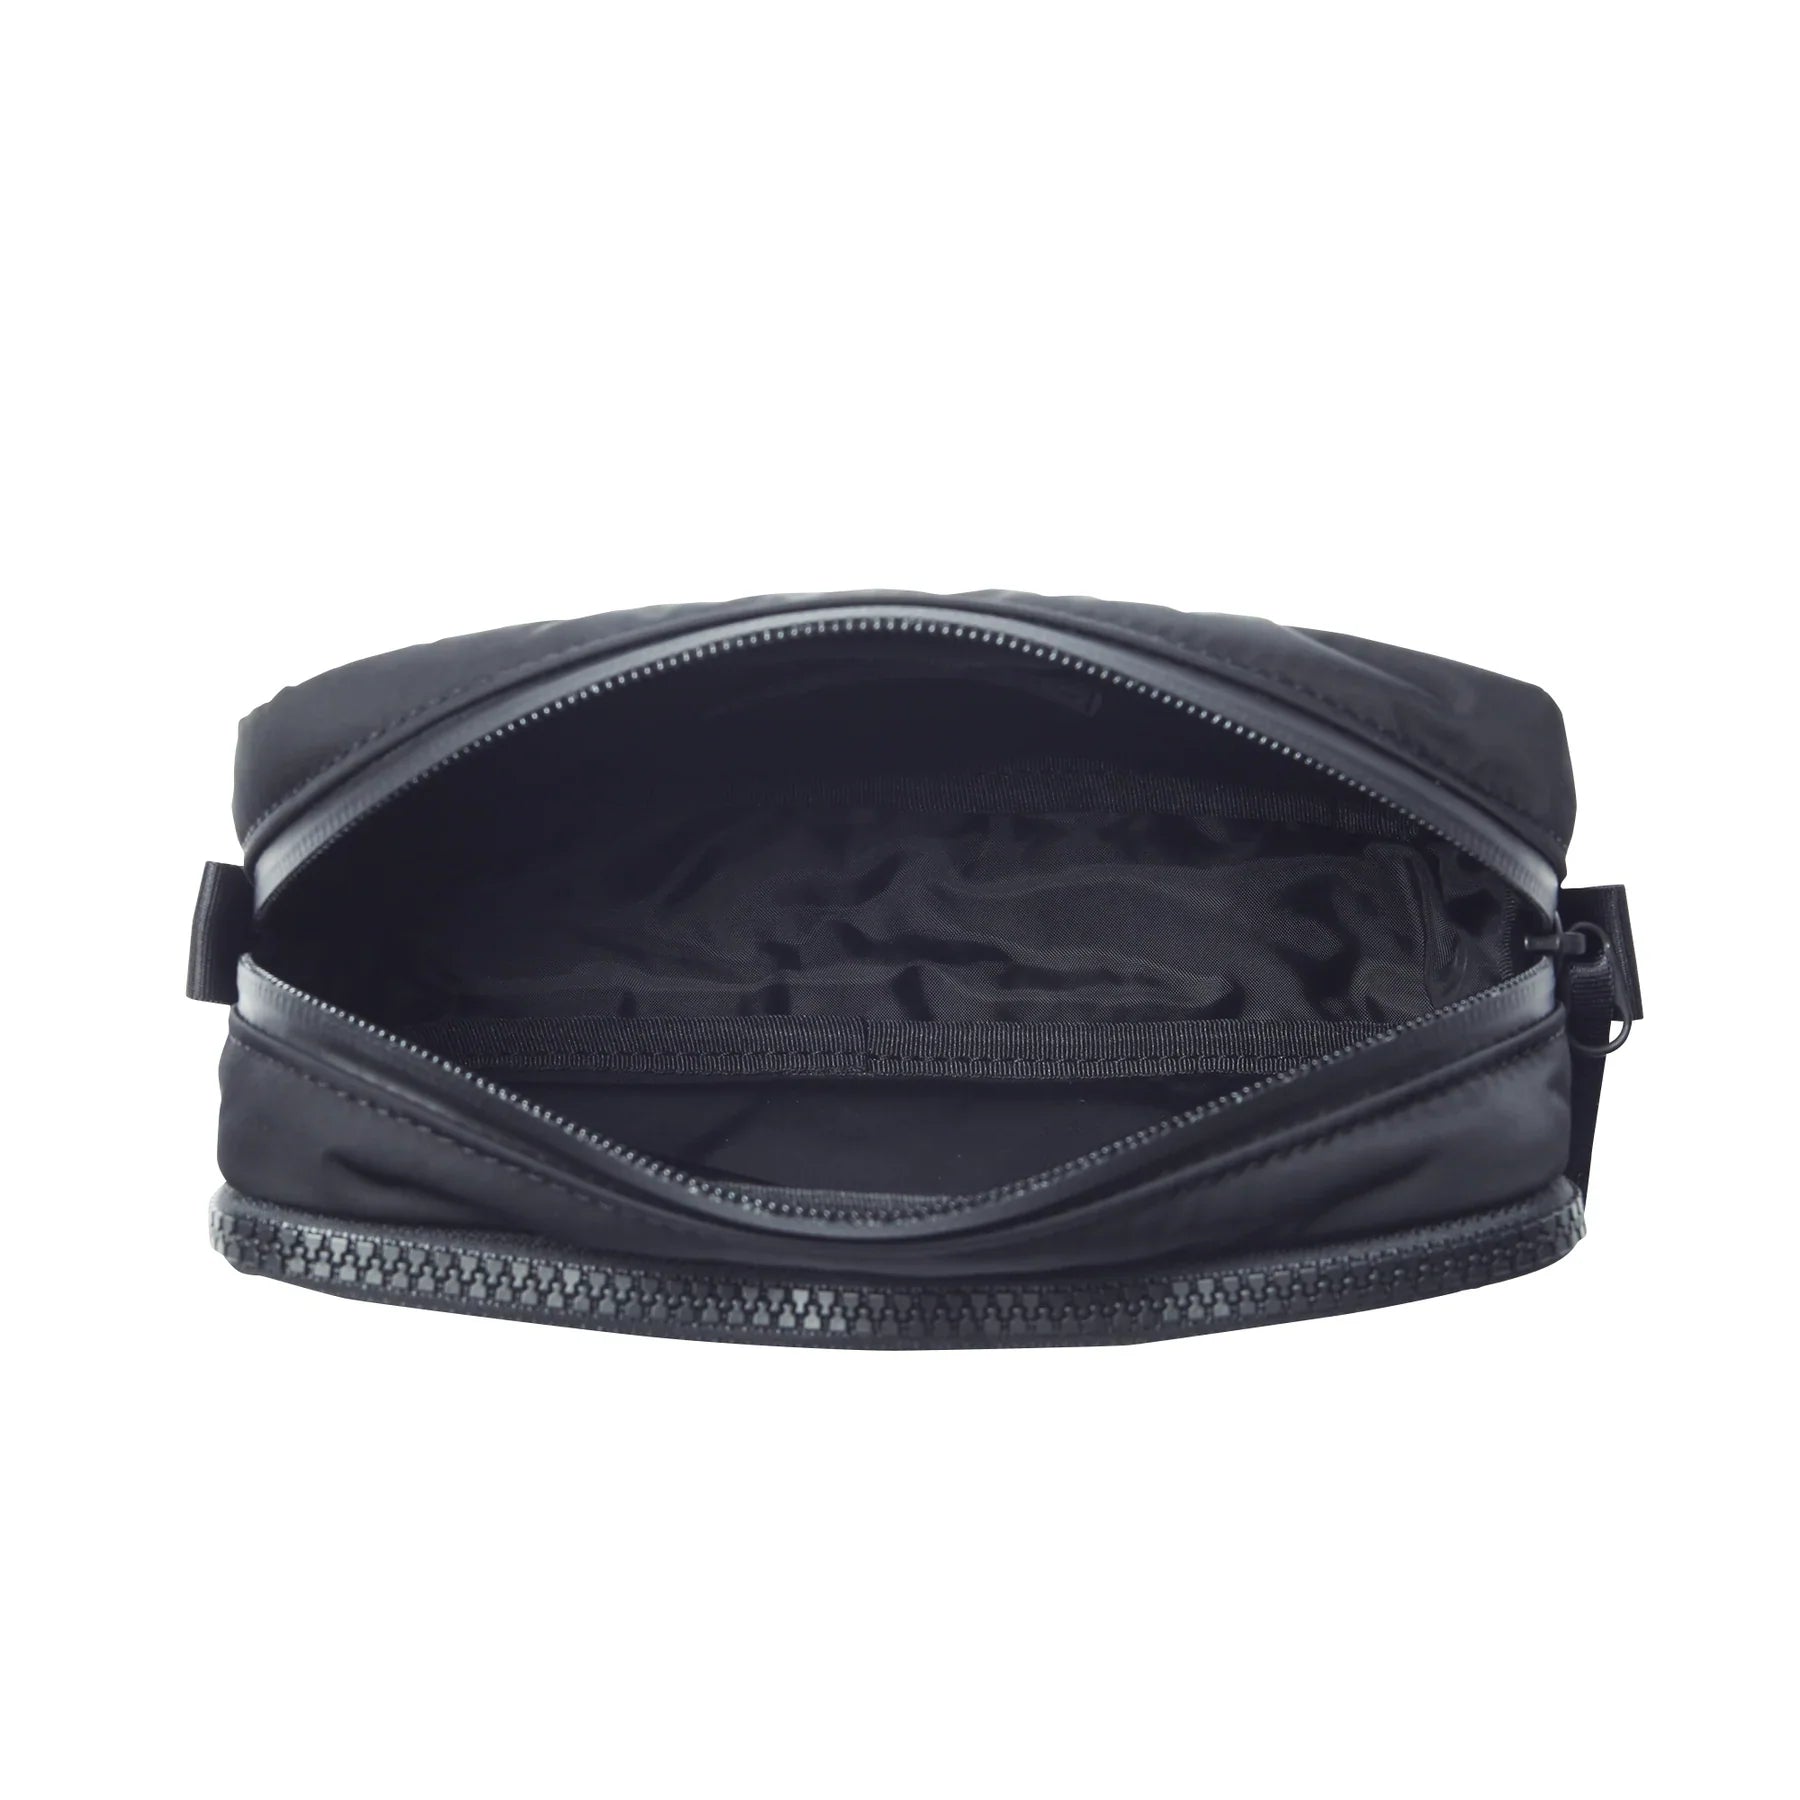 RAMIDUS / “BLACK BEAUTY” GROOMING POUCH